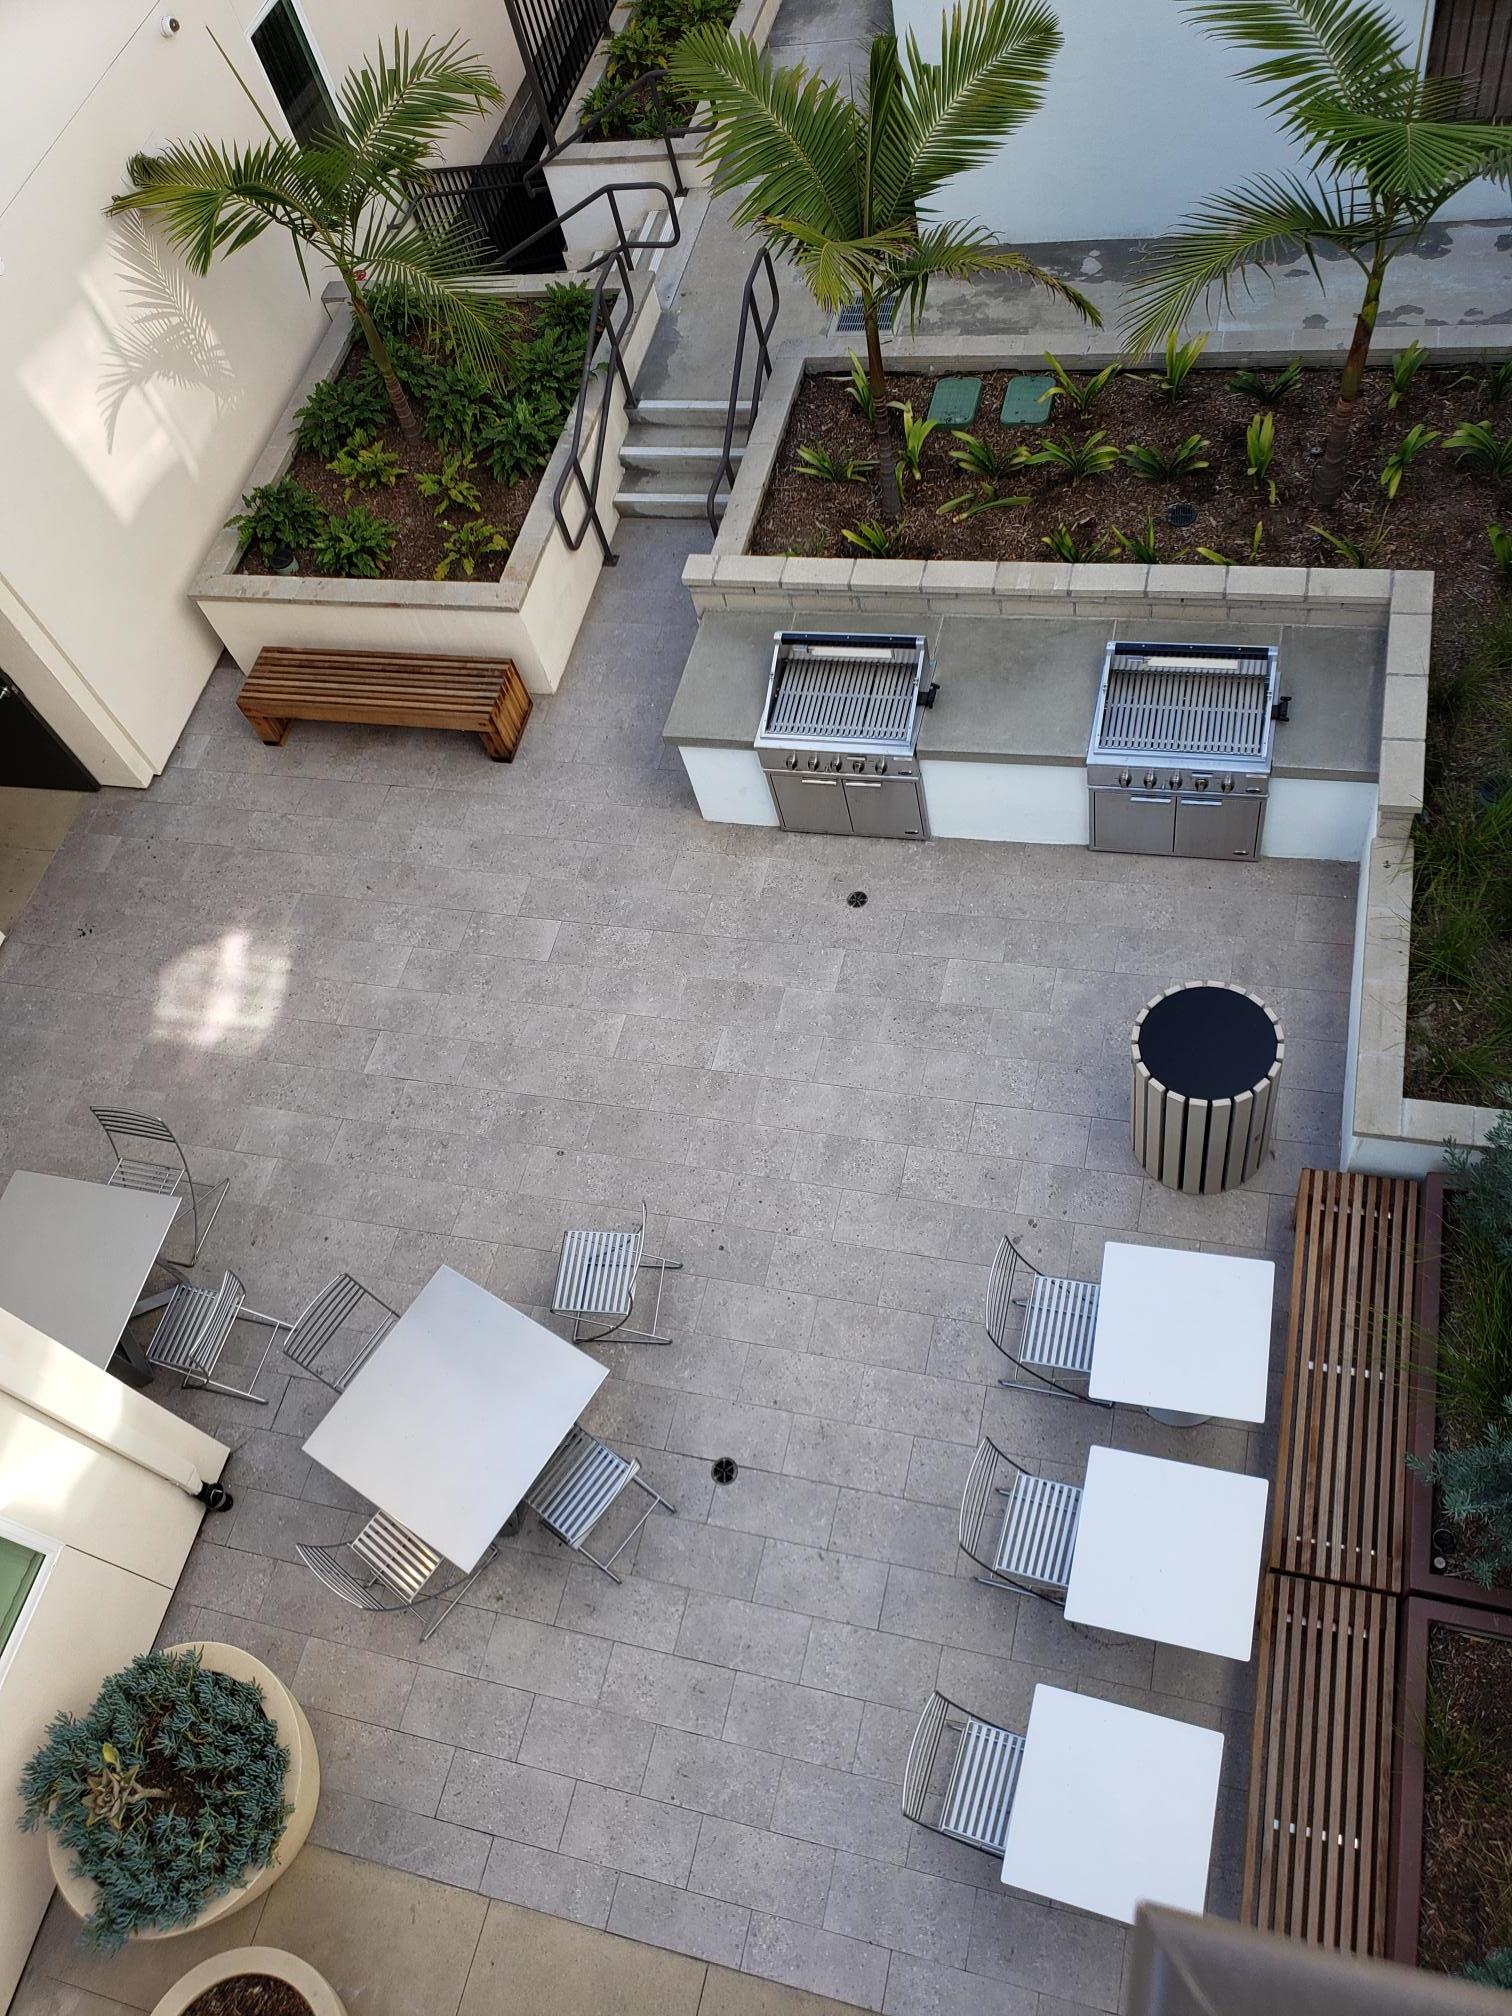 view of Coreonel Apartments courtyard from upper level . Within courtyard there are several patio table and chairs. Large planters located in area. BBQ grill available